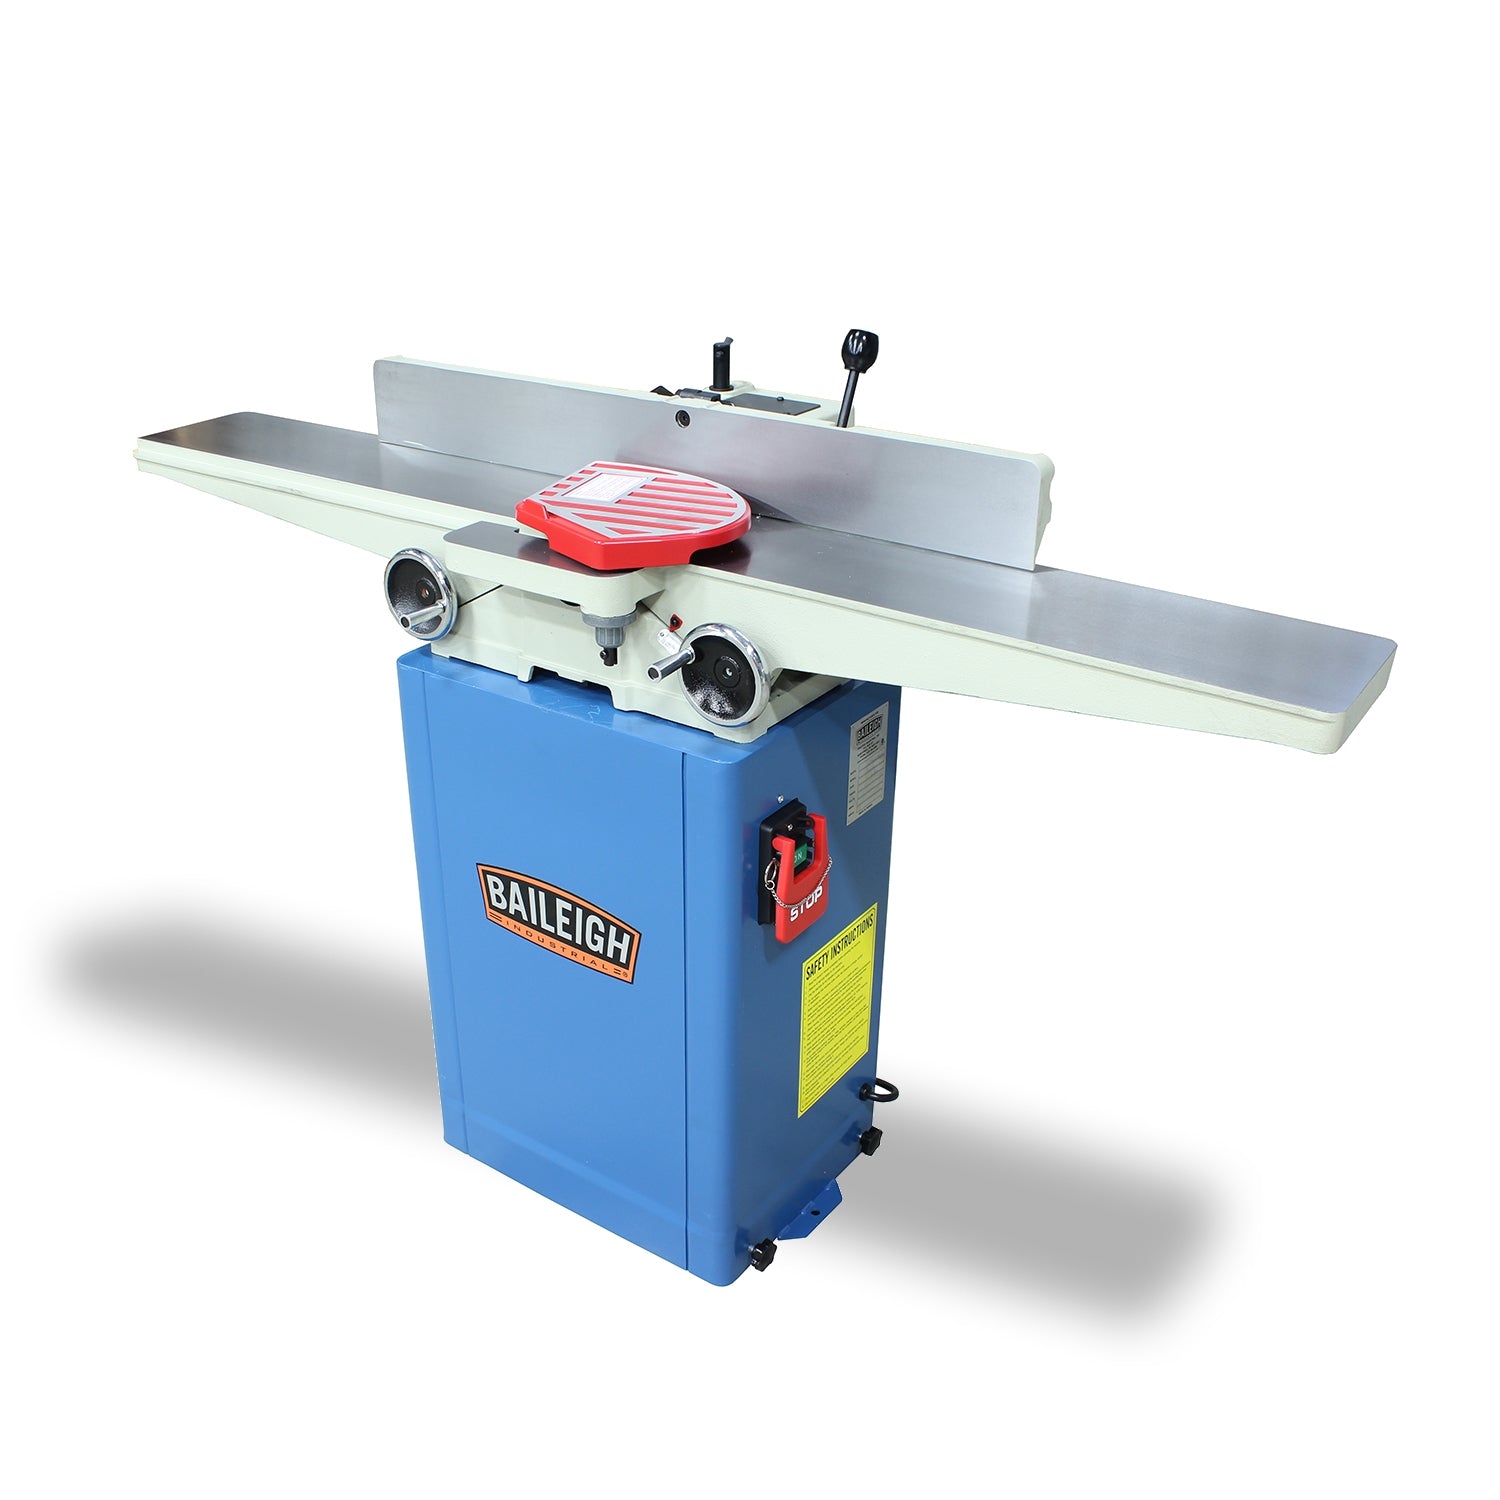 Baileigh IJ-655-1.0 110/220V 1 Phase (Prewired 110v) 1hp 6" Jointer, 55" Table Length, 5000 rpm, 2-1/2" Cutter Head